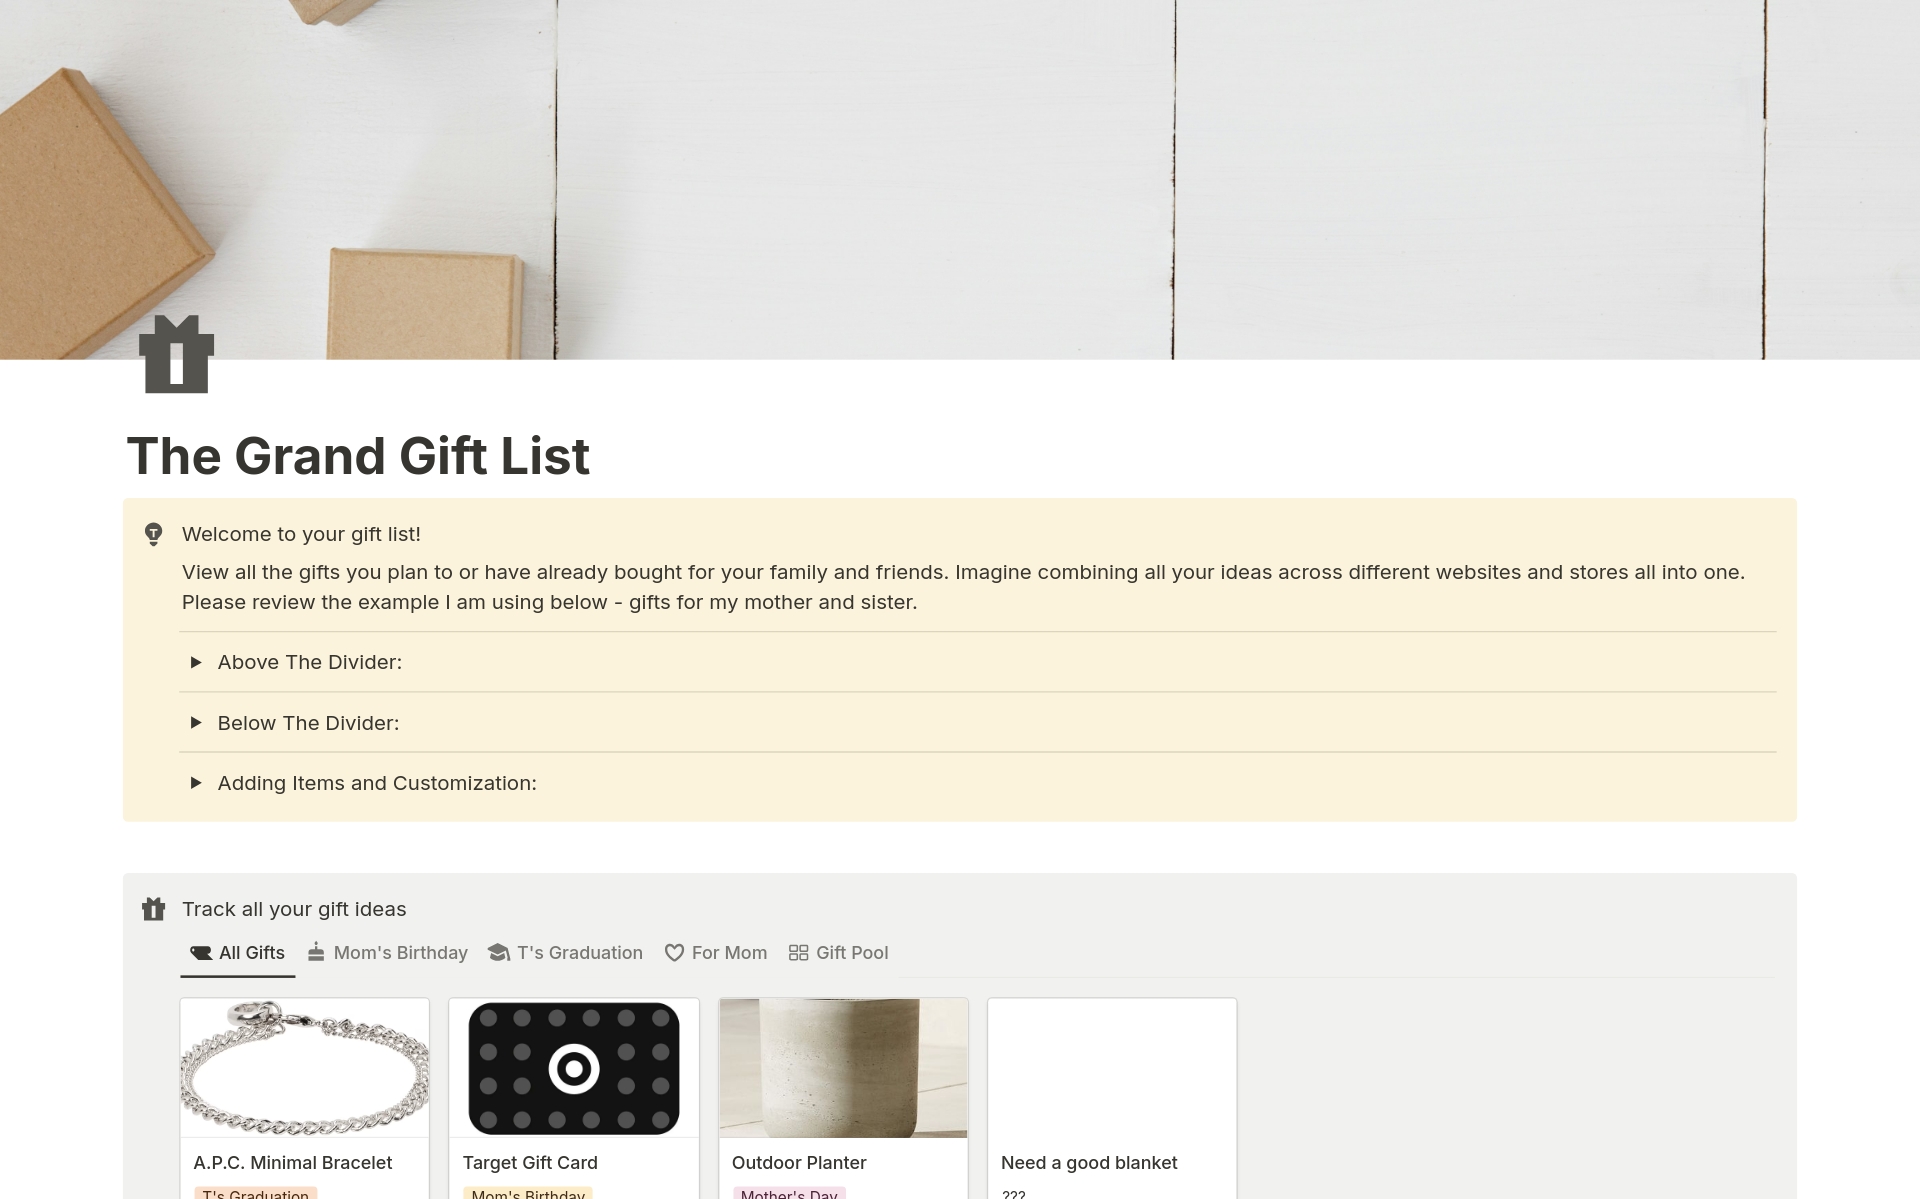 This template is a handy list for all the gifts you plan to buy for your family and friends.